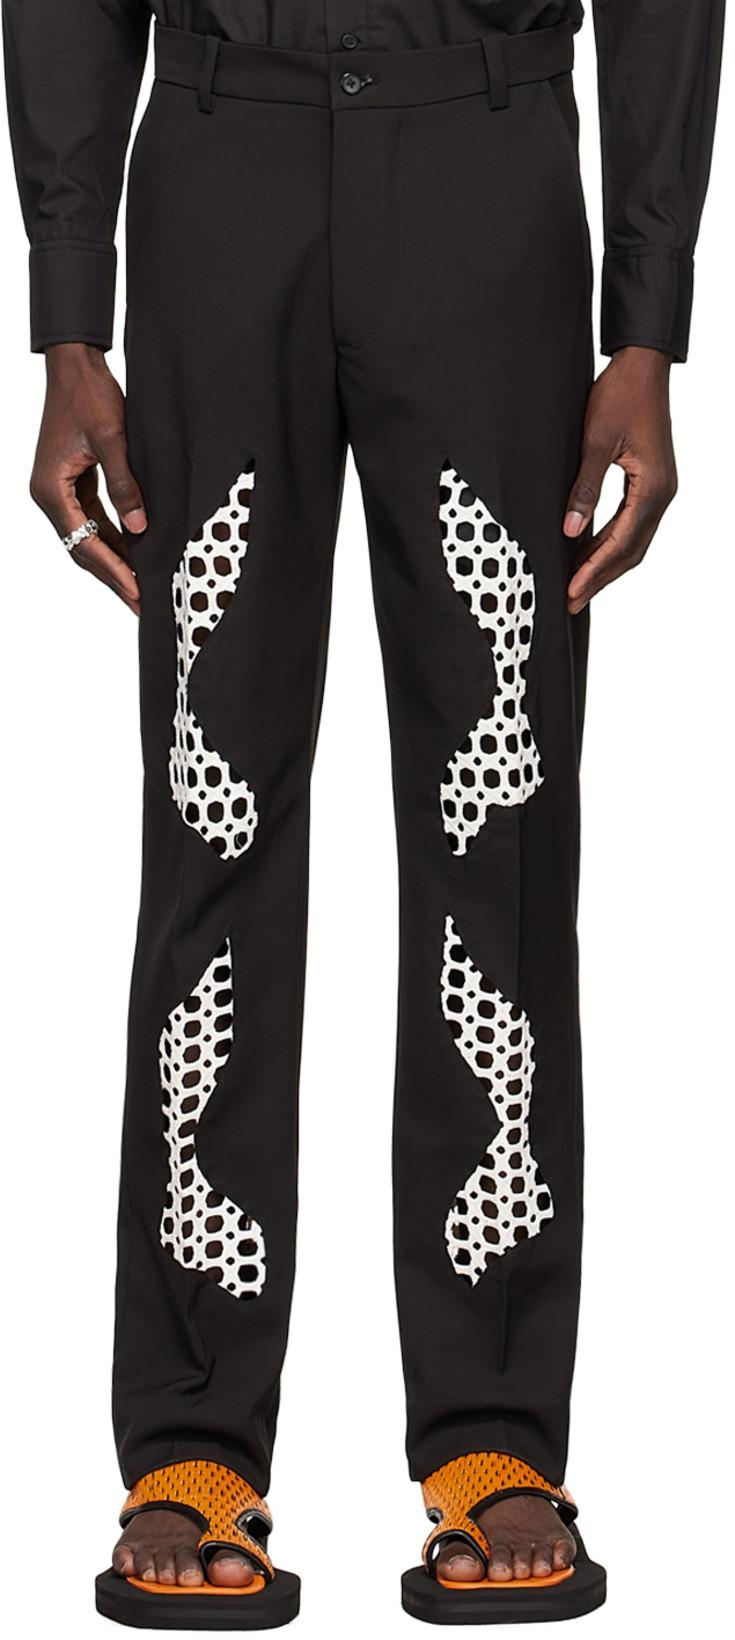 Black Cotton Trousers by TOKYO JAMES